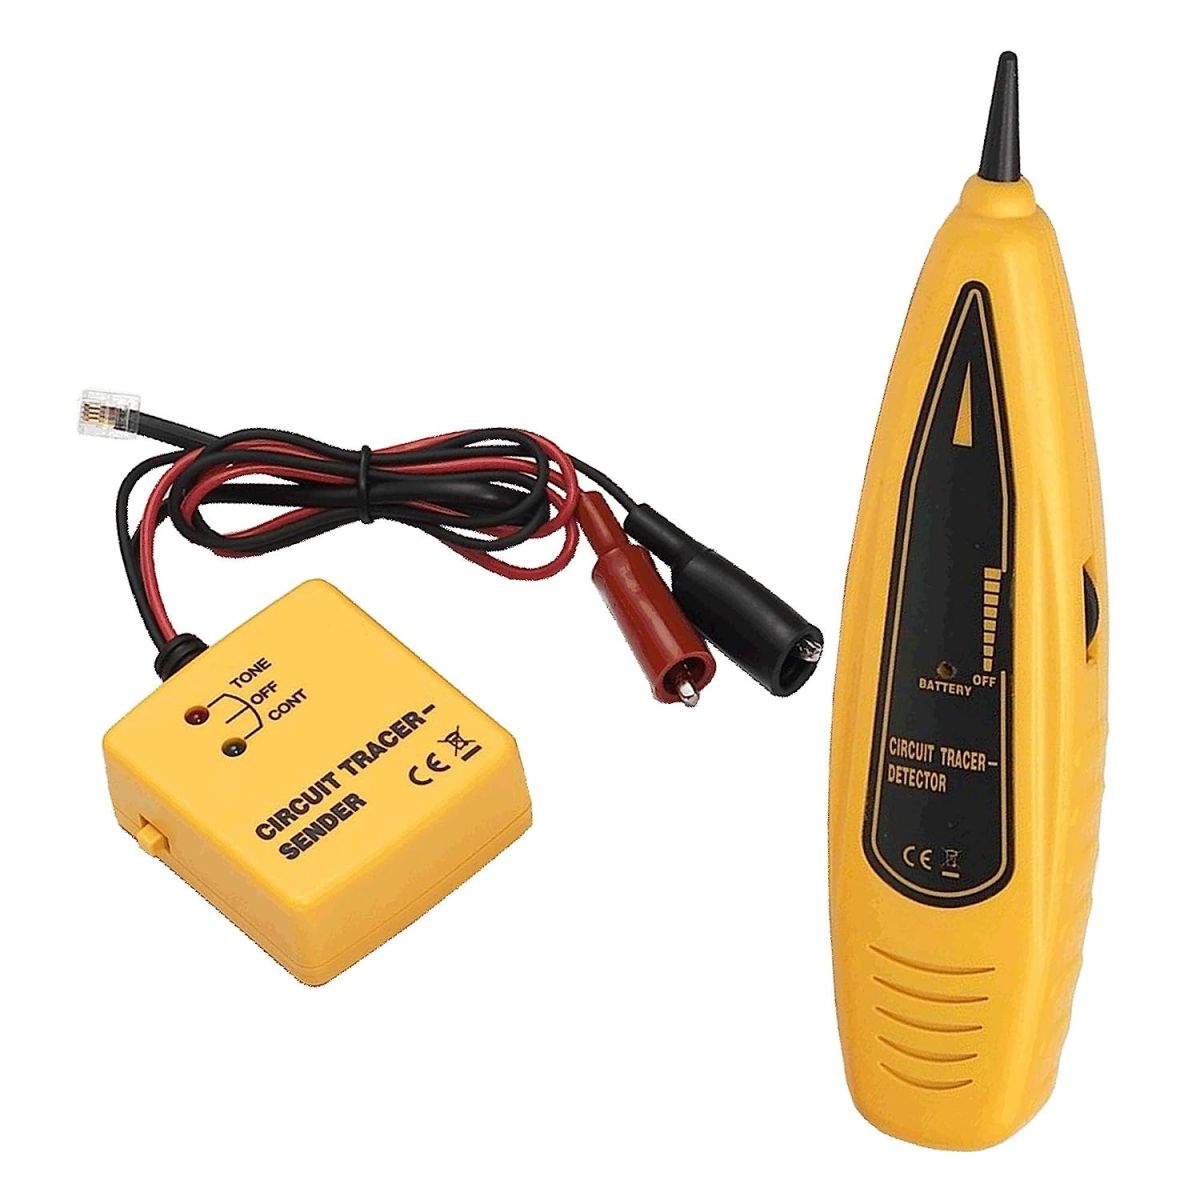 PTE™ Wire Tracer & Circuit Tester -Tone Generator & Probe Kit - Find & Trace Wires & Cables, Test Circuit Continuity, Network Telephone Line, Coaxial, Automotive - Features Alligator Clips & RJ11 Plug